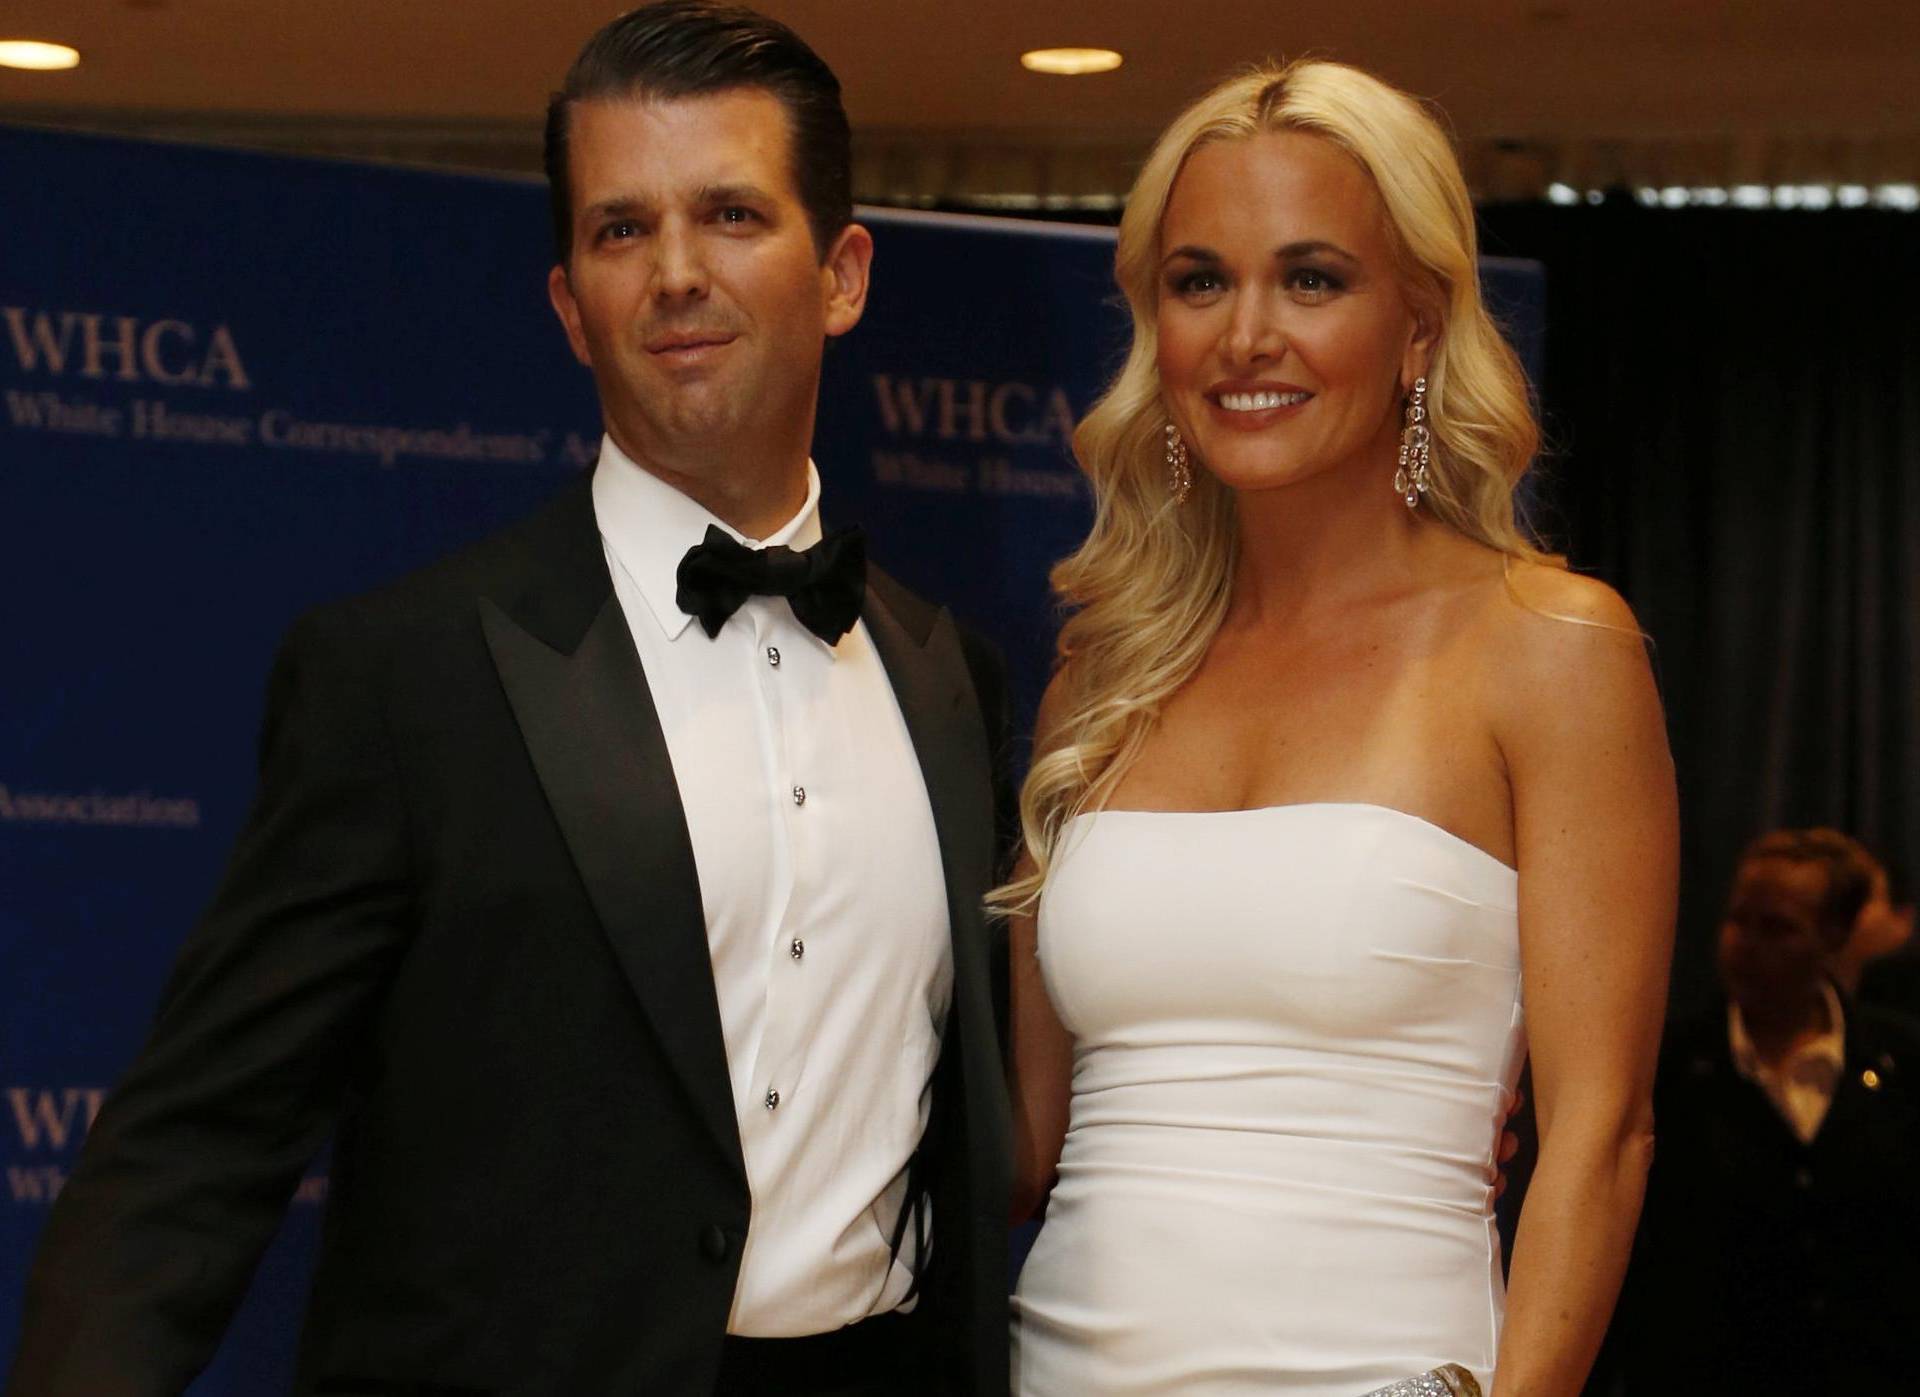 FILE PHOTO: Donald Trump Jr. and wife Vanessa arrive on the red carpet for the annual White House Correspondents Association Dinner in Washington